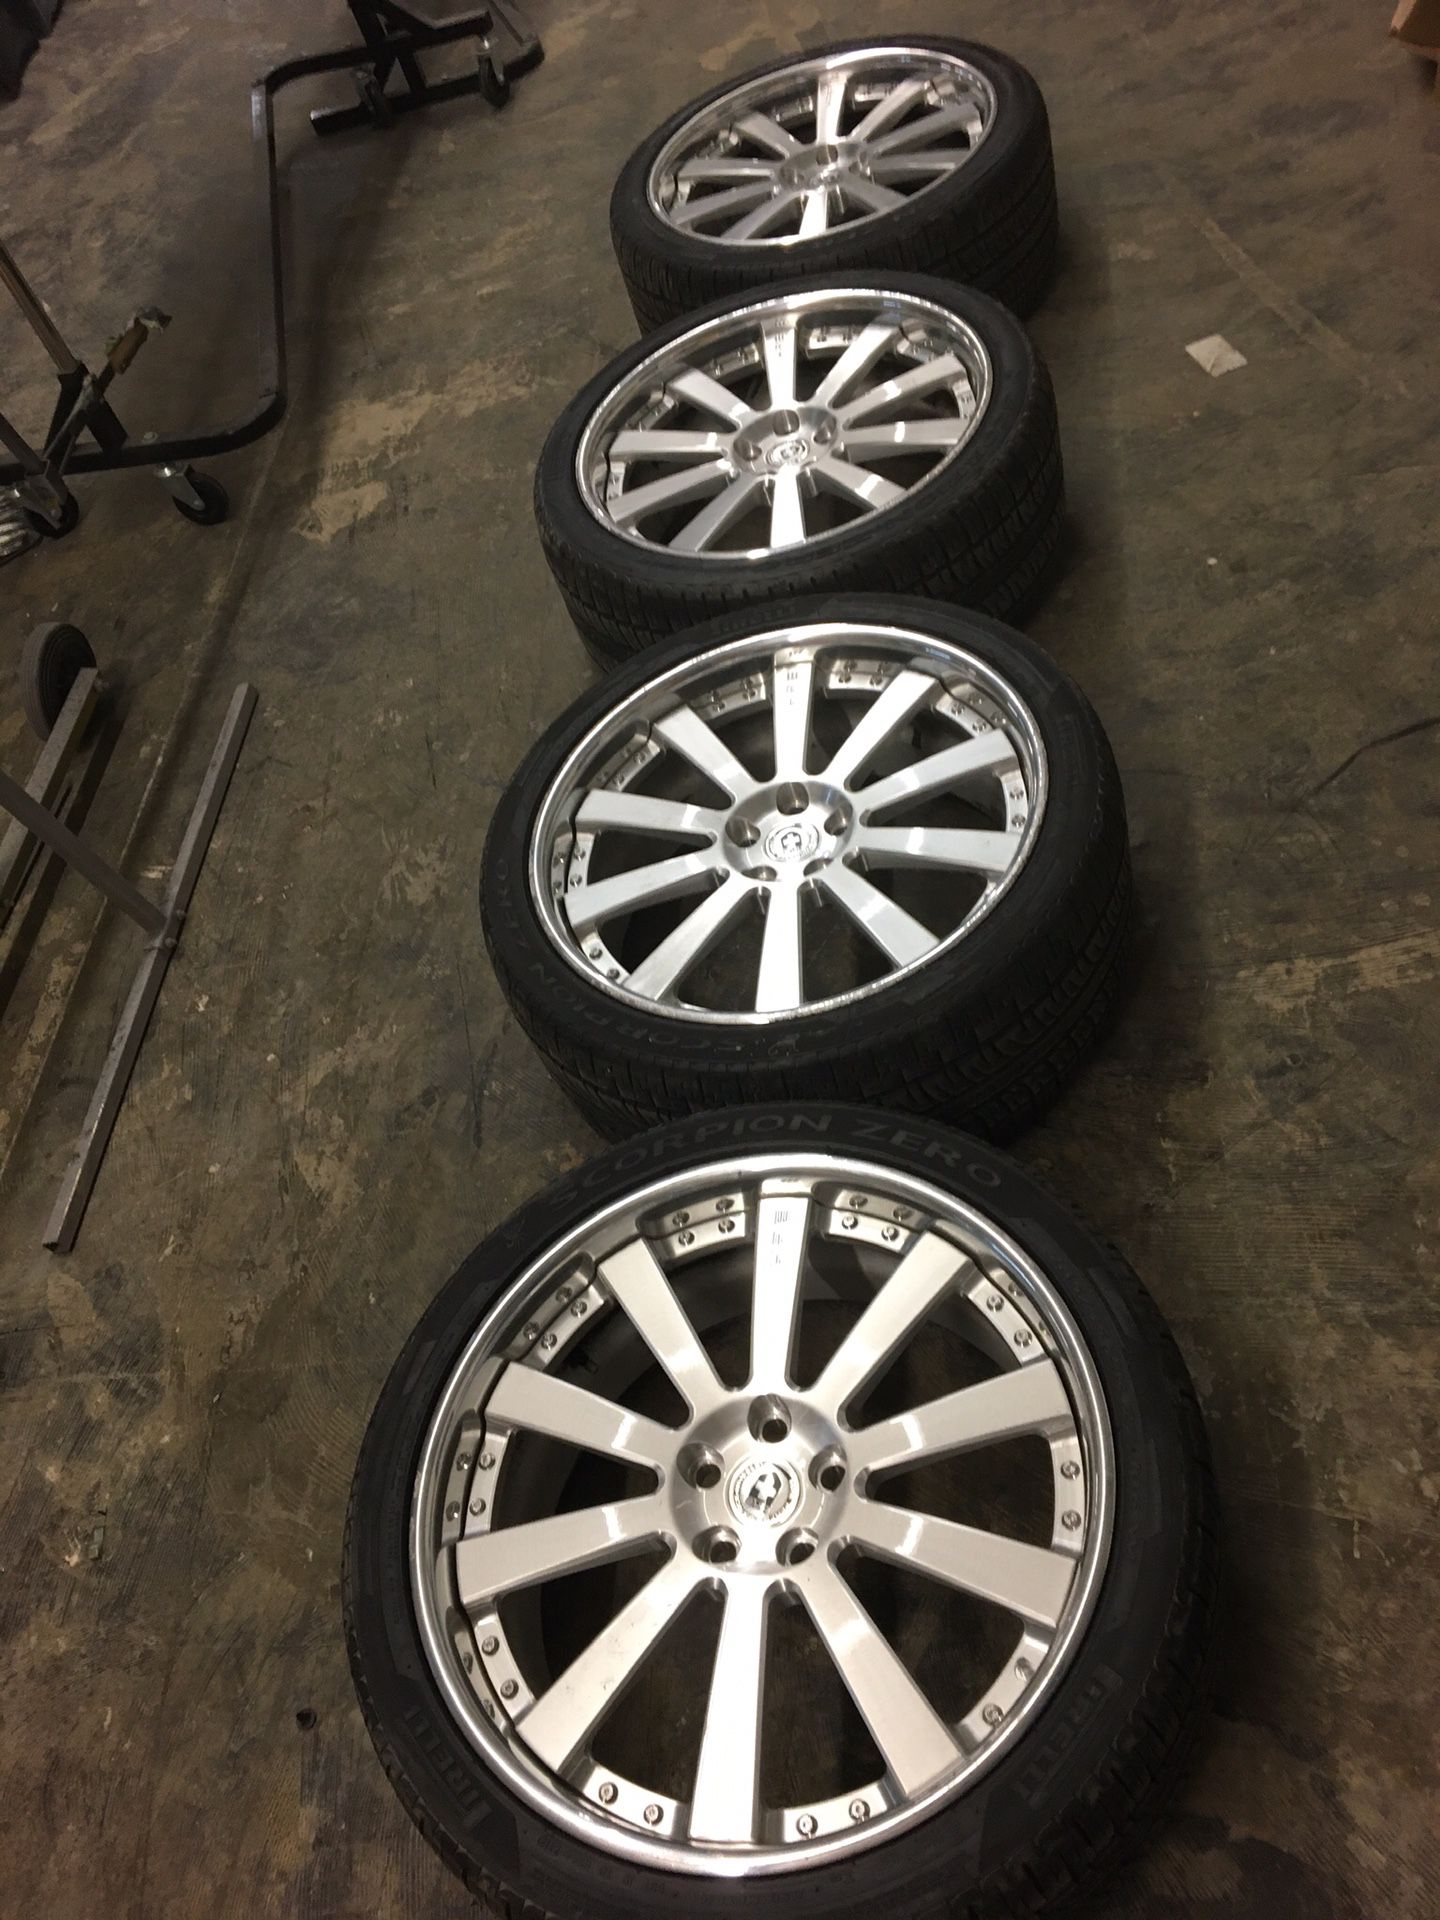 22" HRE Rims 5x120 w/tires - Rare, One of a kind